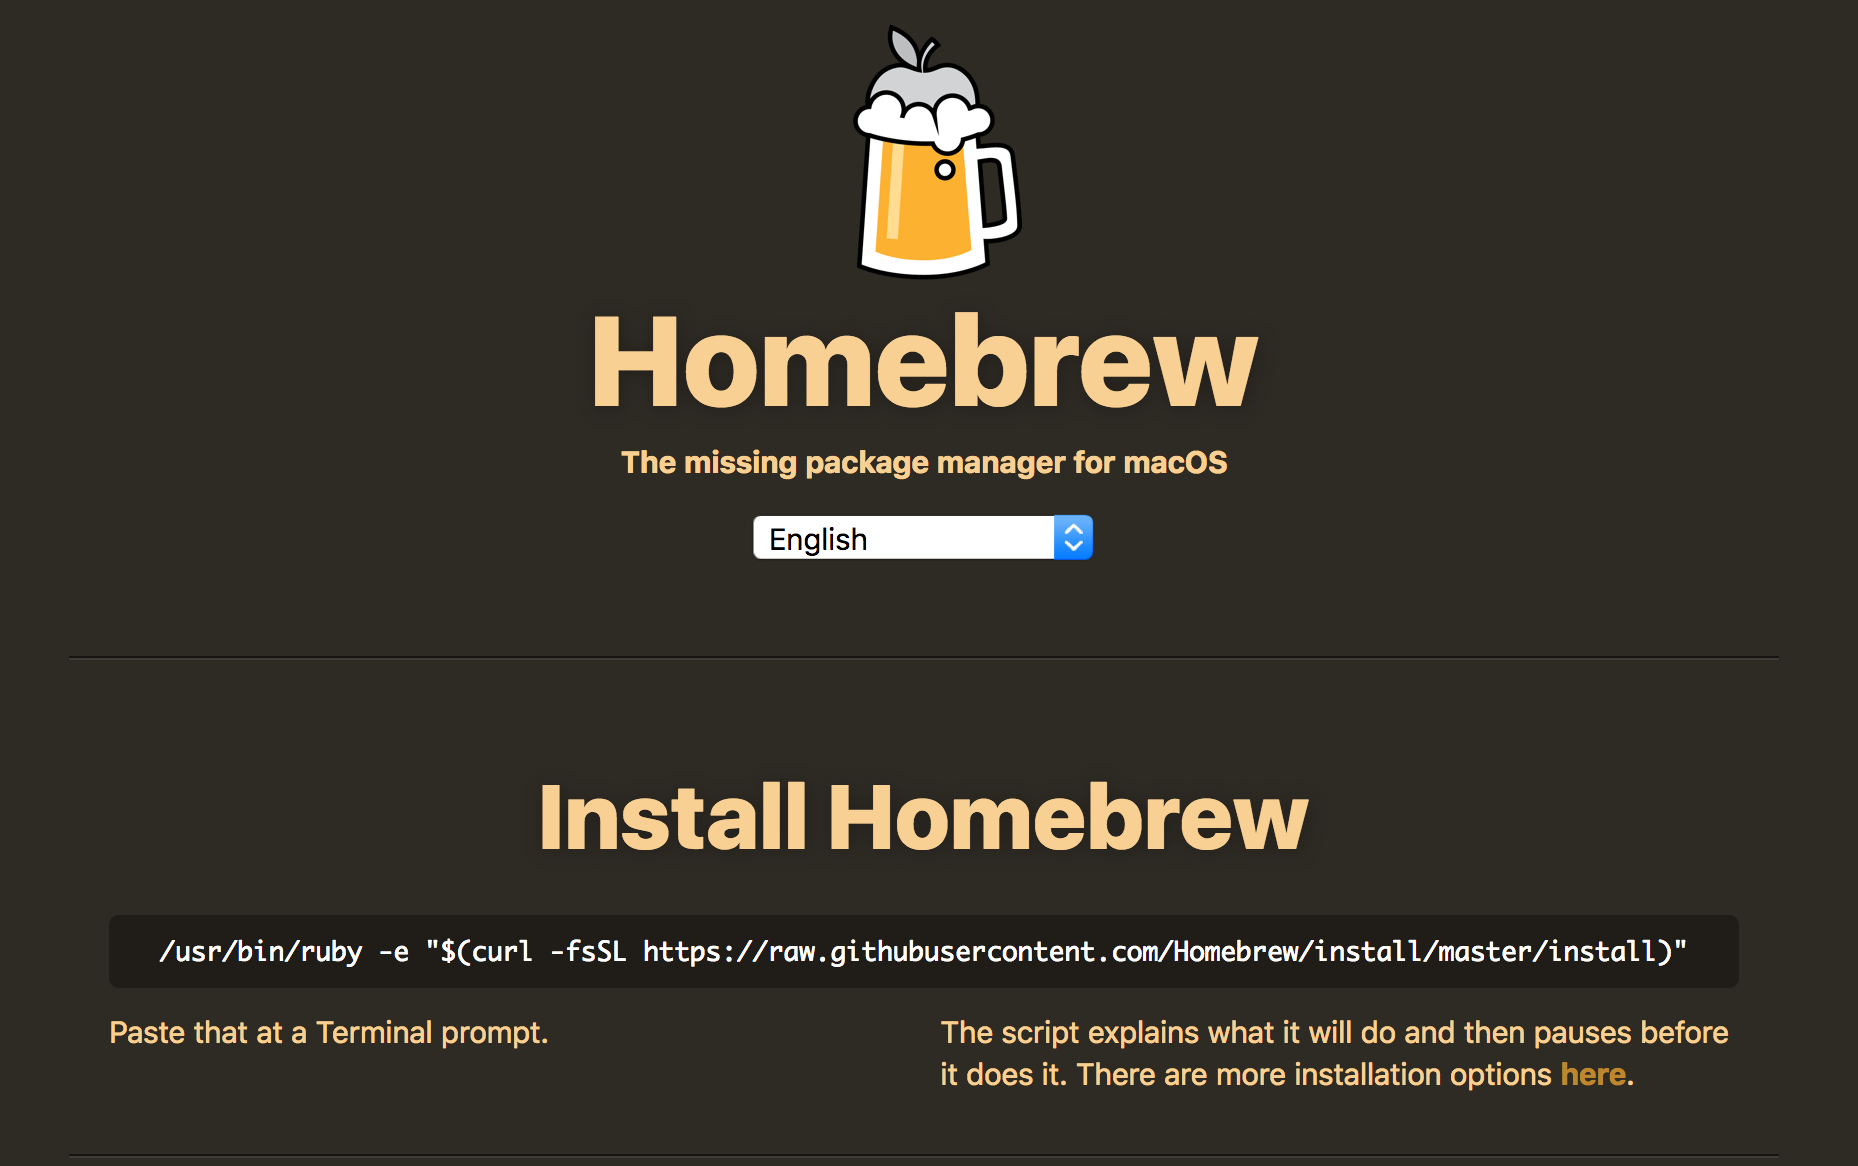 Screenshot of HomeBrew’s home page